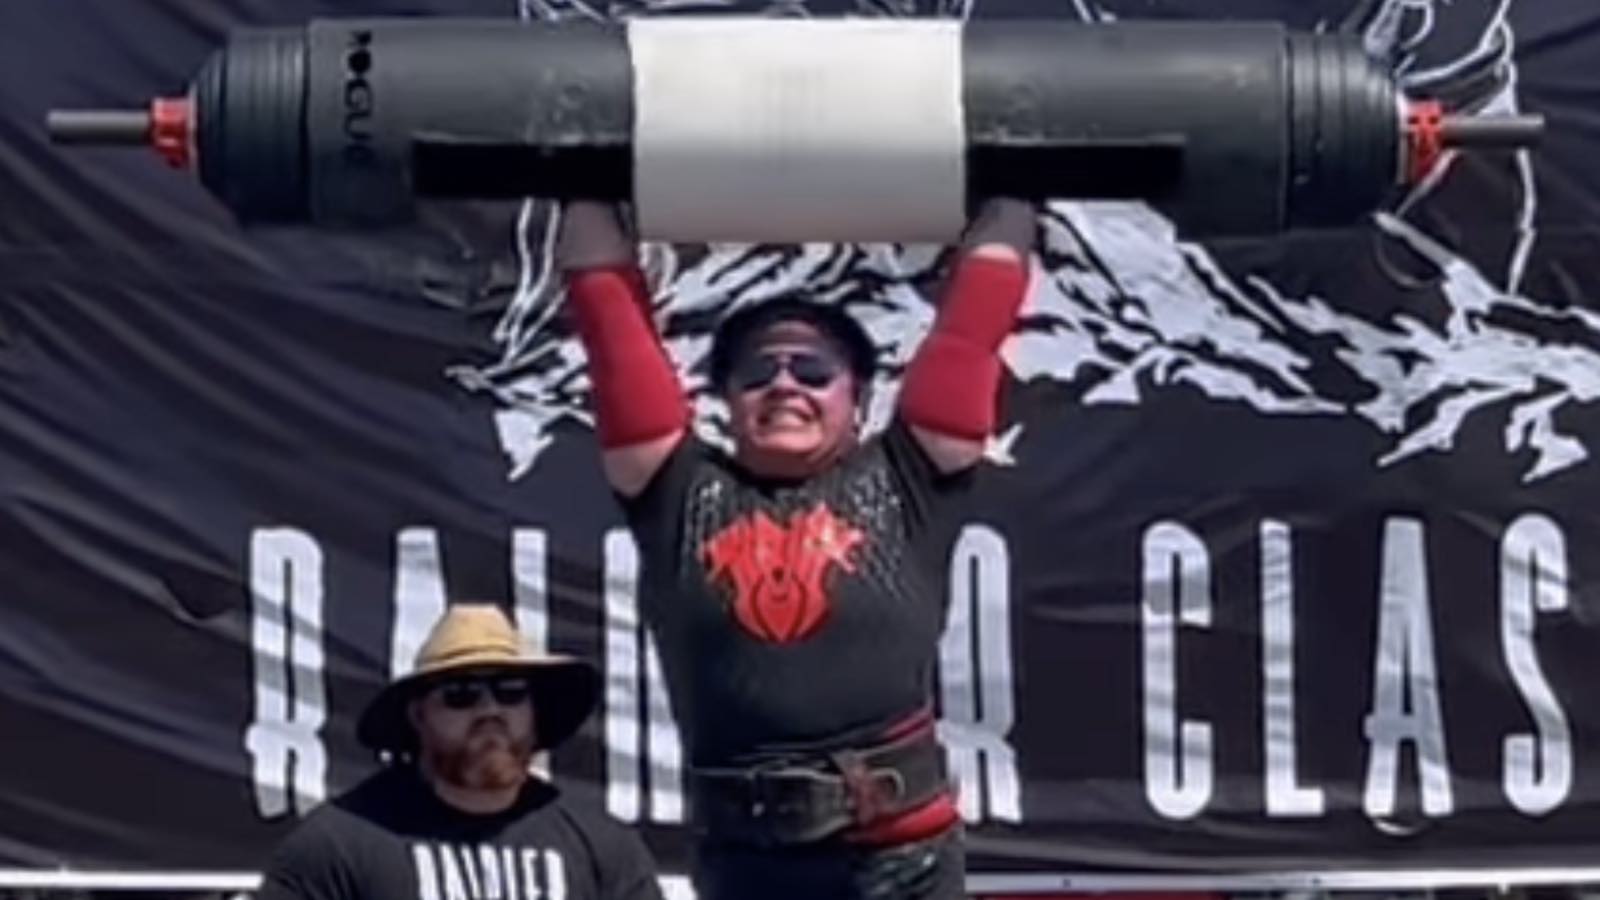 inez-carrasquillo-sets-log-lift-world-record-of-1459-kilograms-(321.6-pounds)-–-breaking-muscle